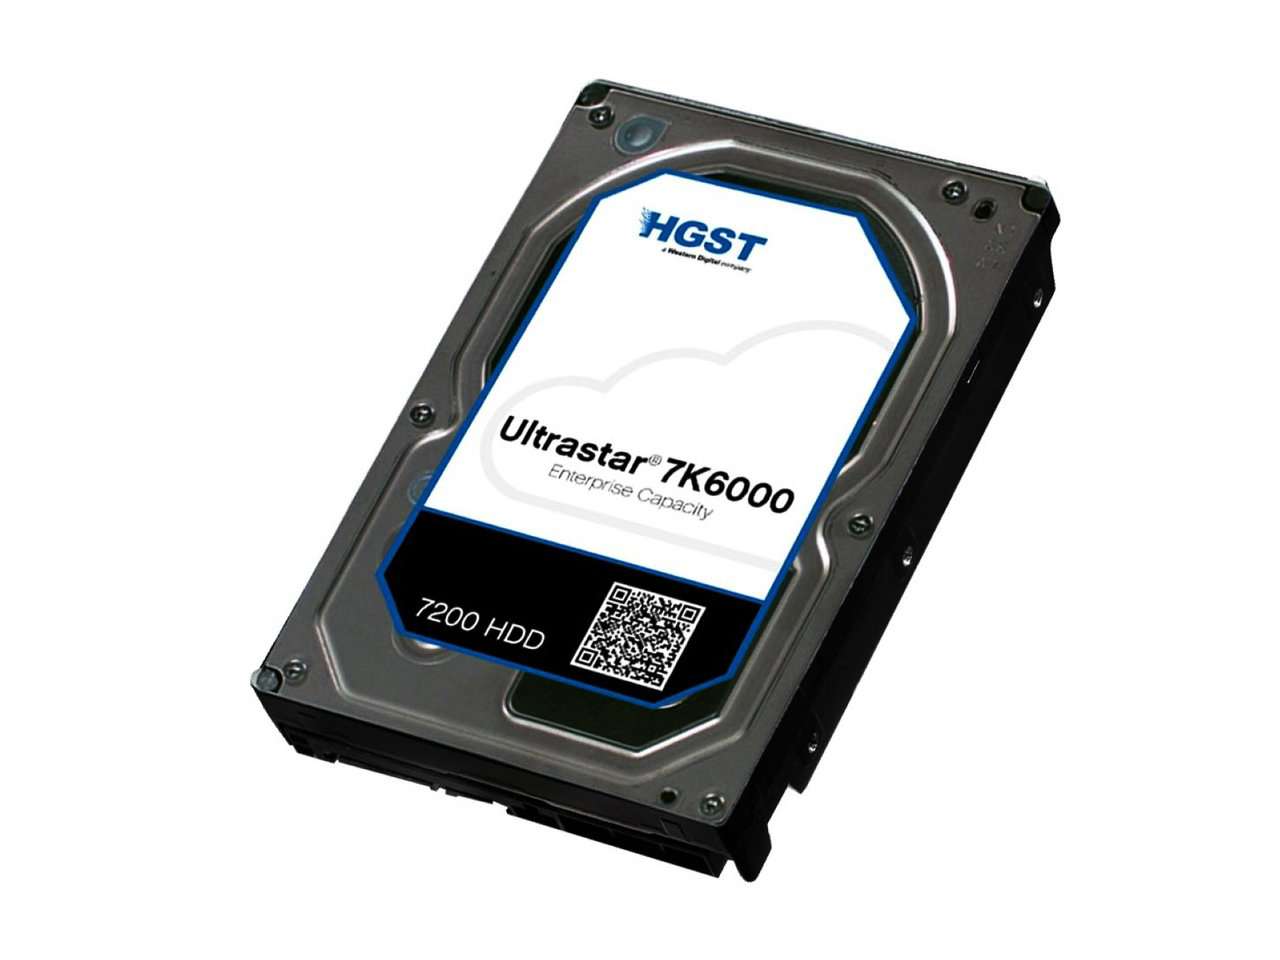 HGST Ultrastar 7K6000 0F22828  HUS726020AL4215 2TB 7.2K RPM SAS 12Gb/s 4Kn 128MB Cache 3.5" TCG FIPS HDD